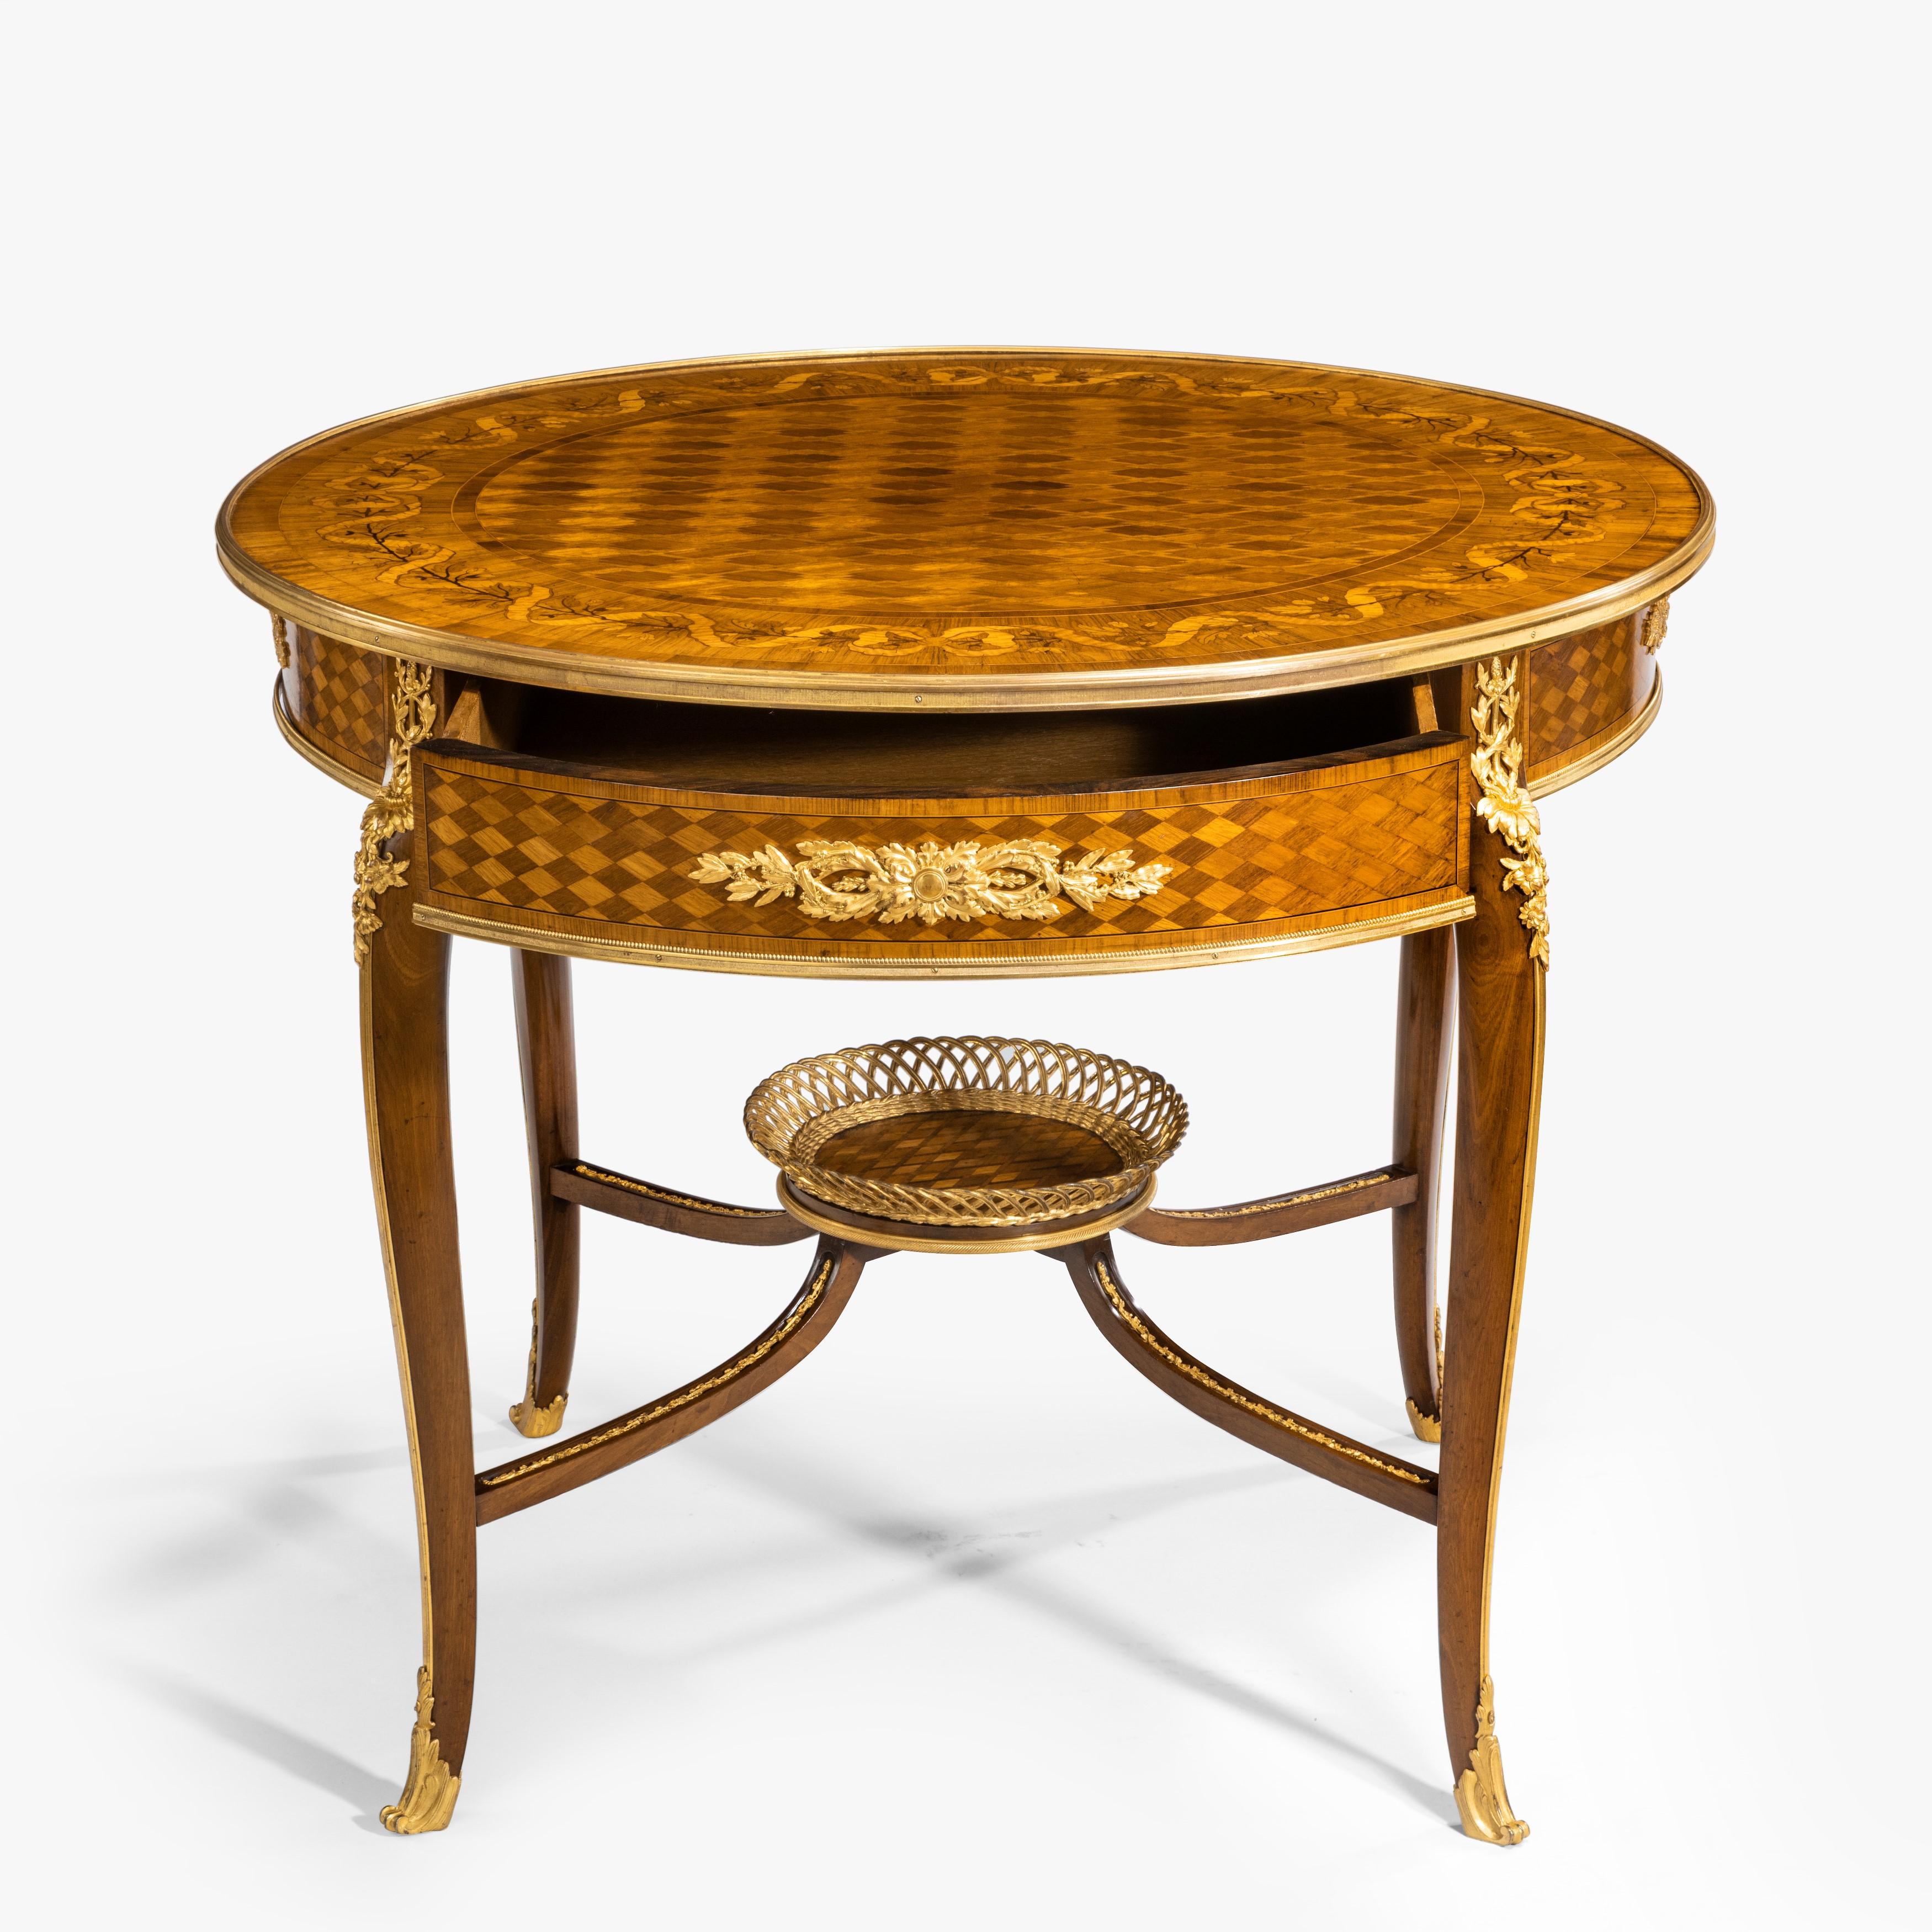 19th Century Parquetry Centre Table in the Louis XVI Manner by François Linke For Sale 2